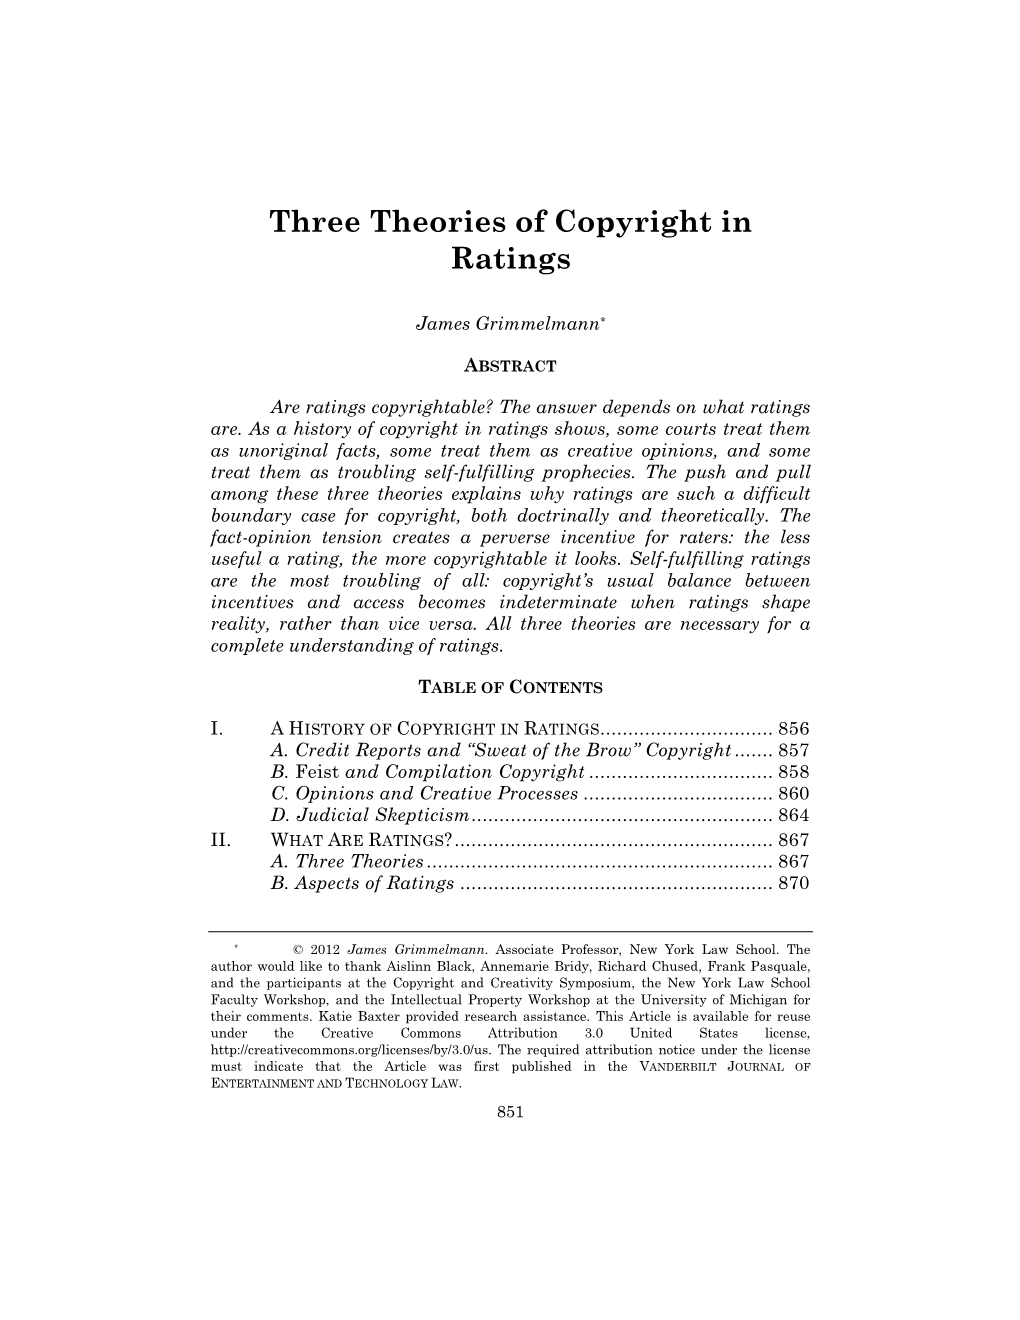 Three Theories of Copyright in Ratings